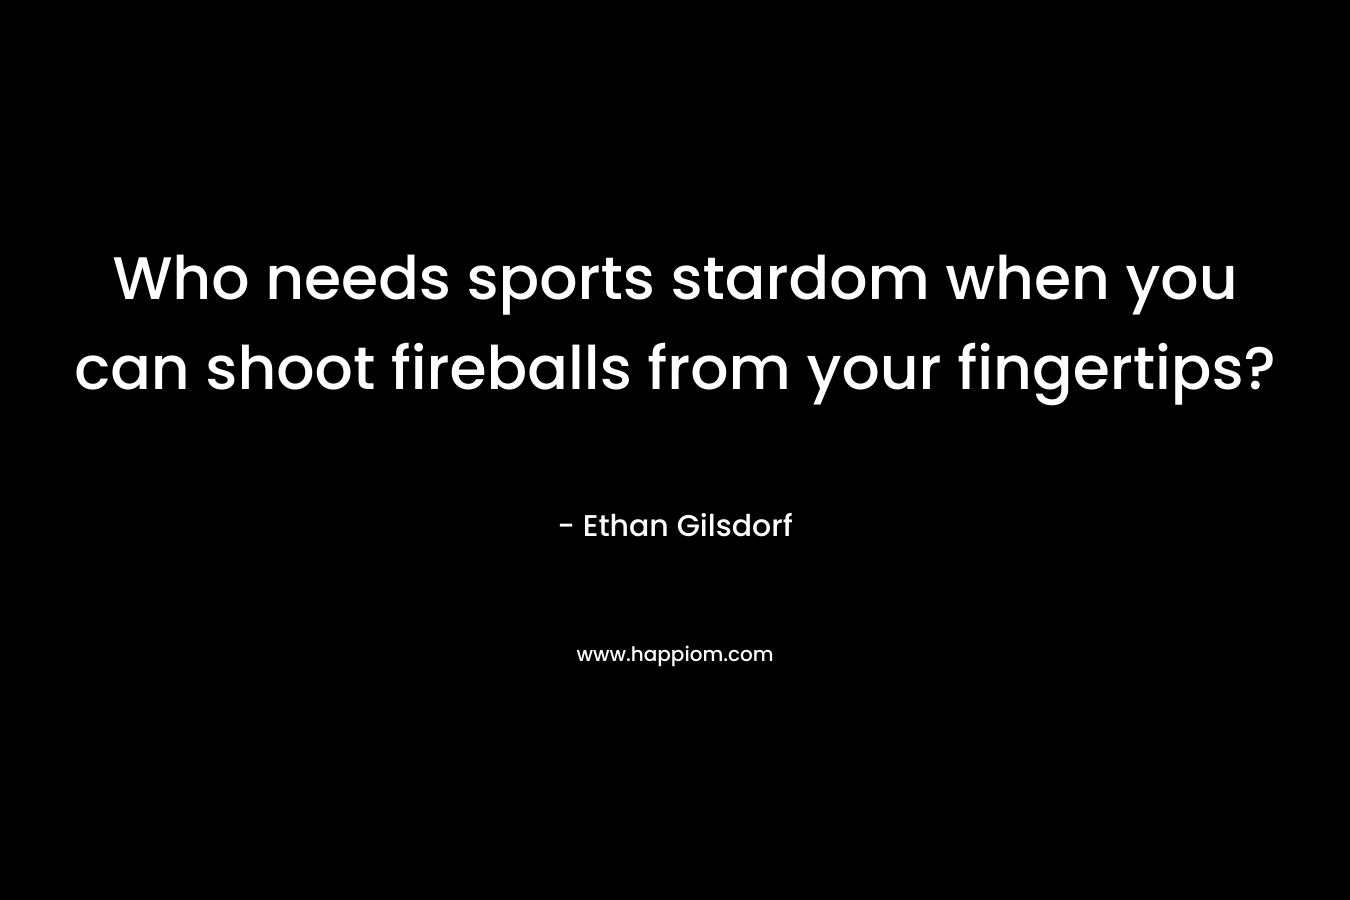 Who needs sports stardom when you can shoot fireballs from your fingertips?